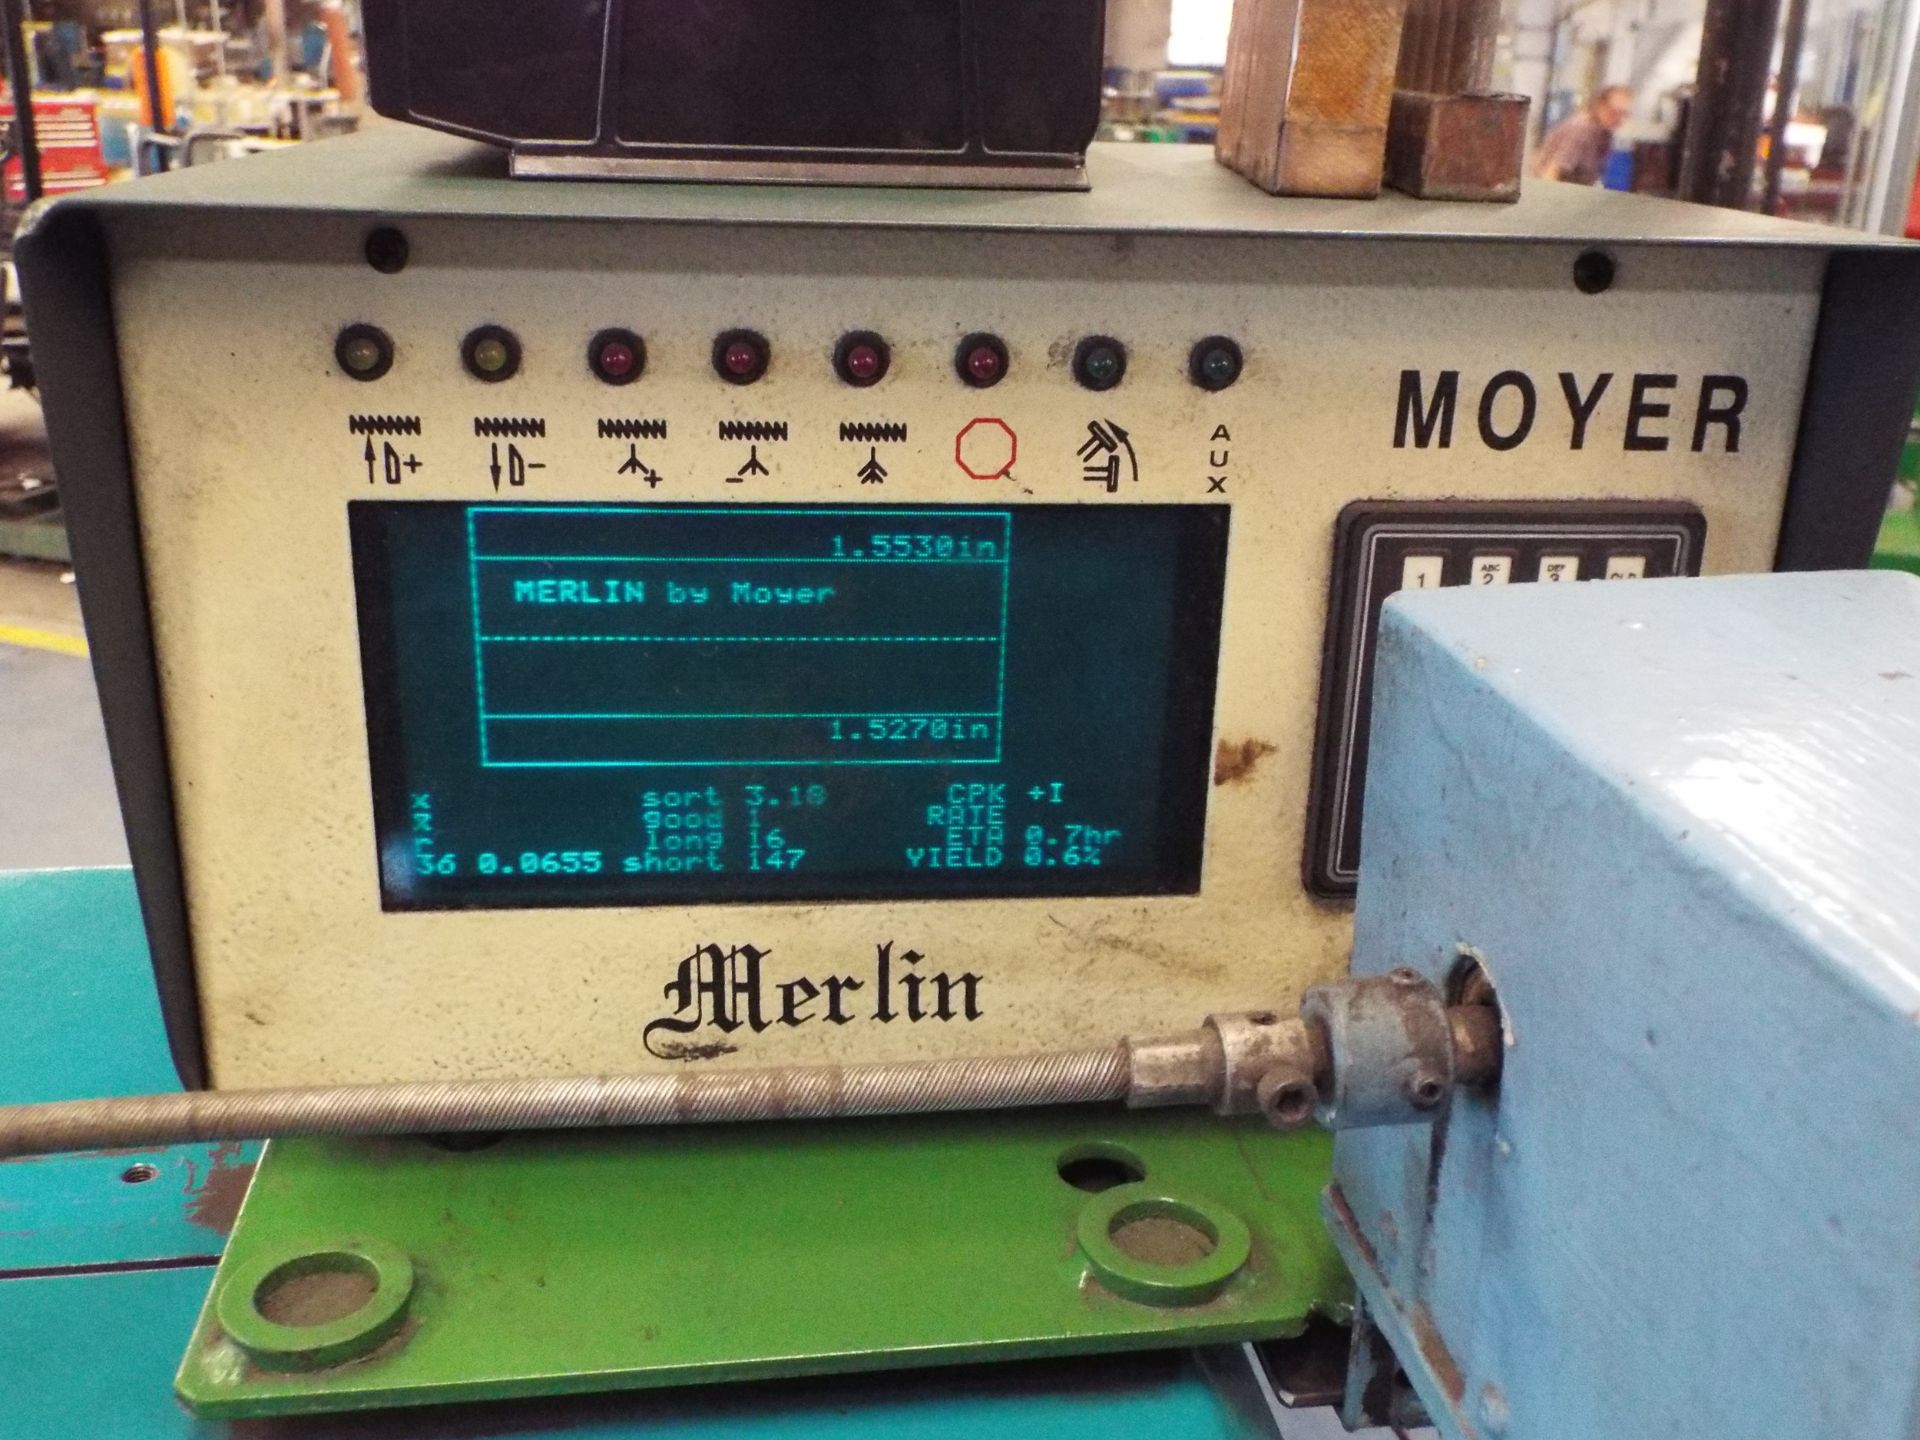 ITAYA D-7E SPRING COILING MACHINE WITH MOYER MERLIN DIGITAL SPRING GAUGE, S/N 5157 (CI) - Image 3 of 5